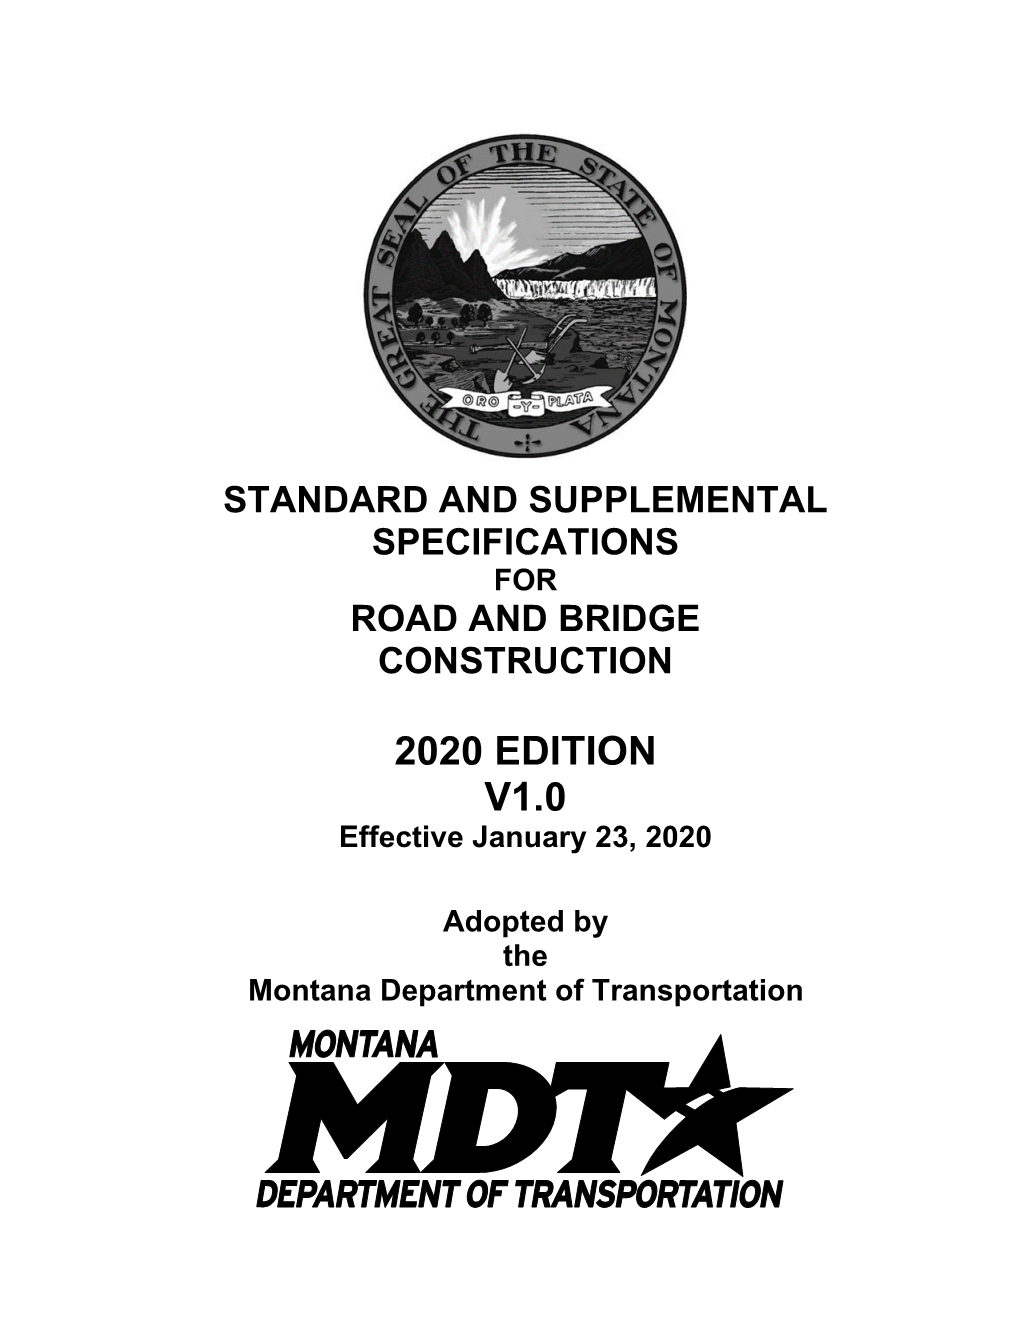 Standard and Supplemental Specifications for Road and Bridge Construction